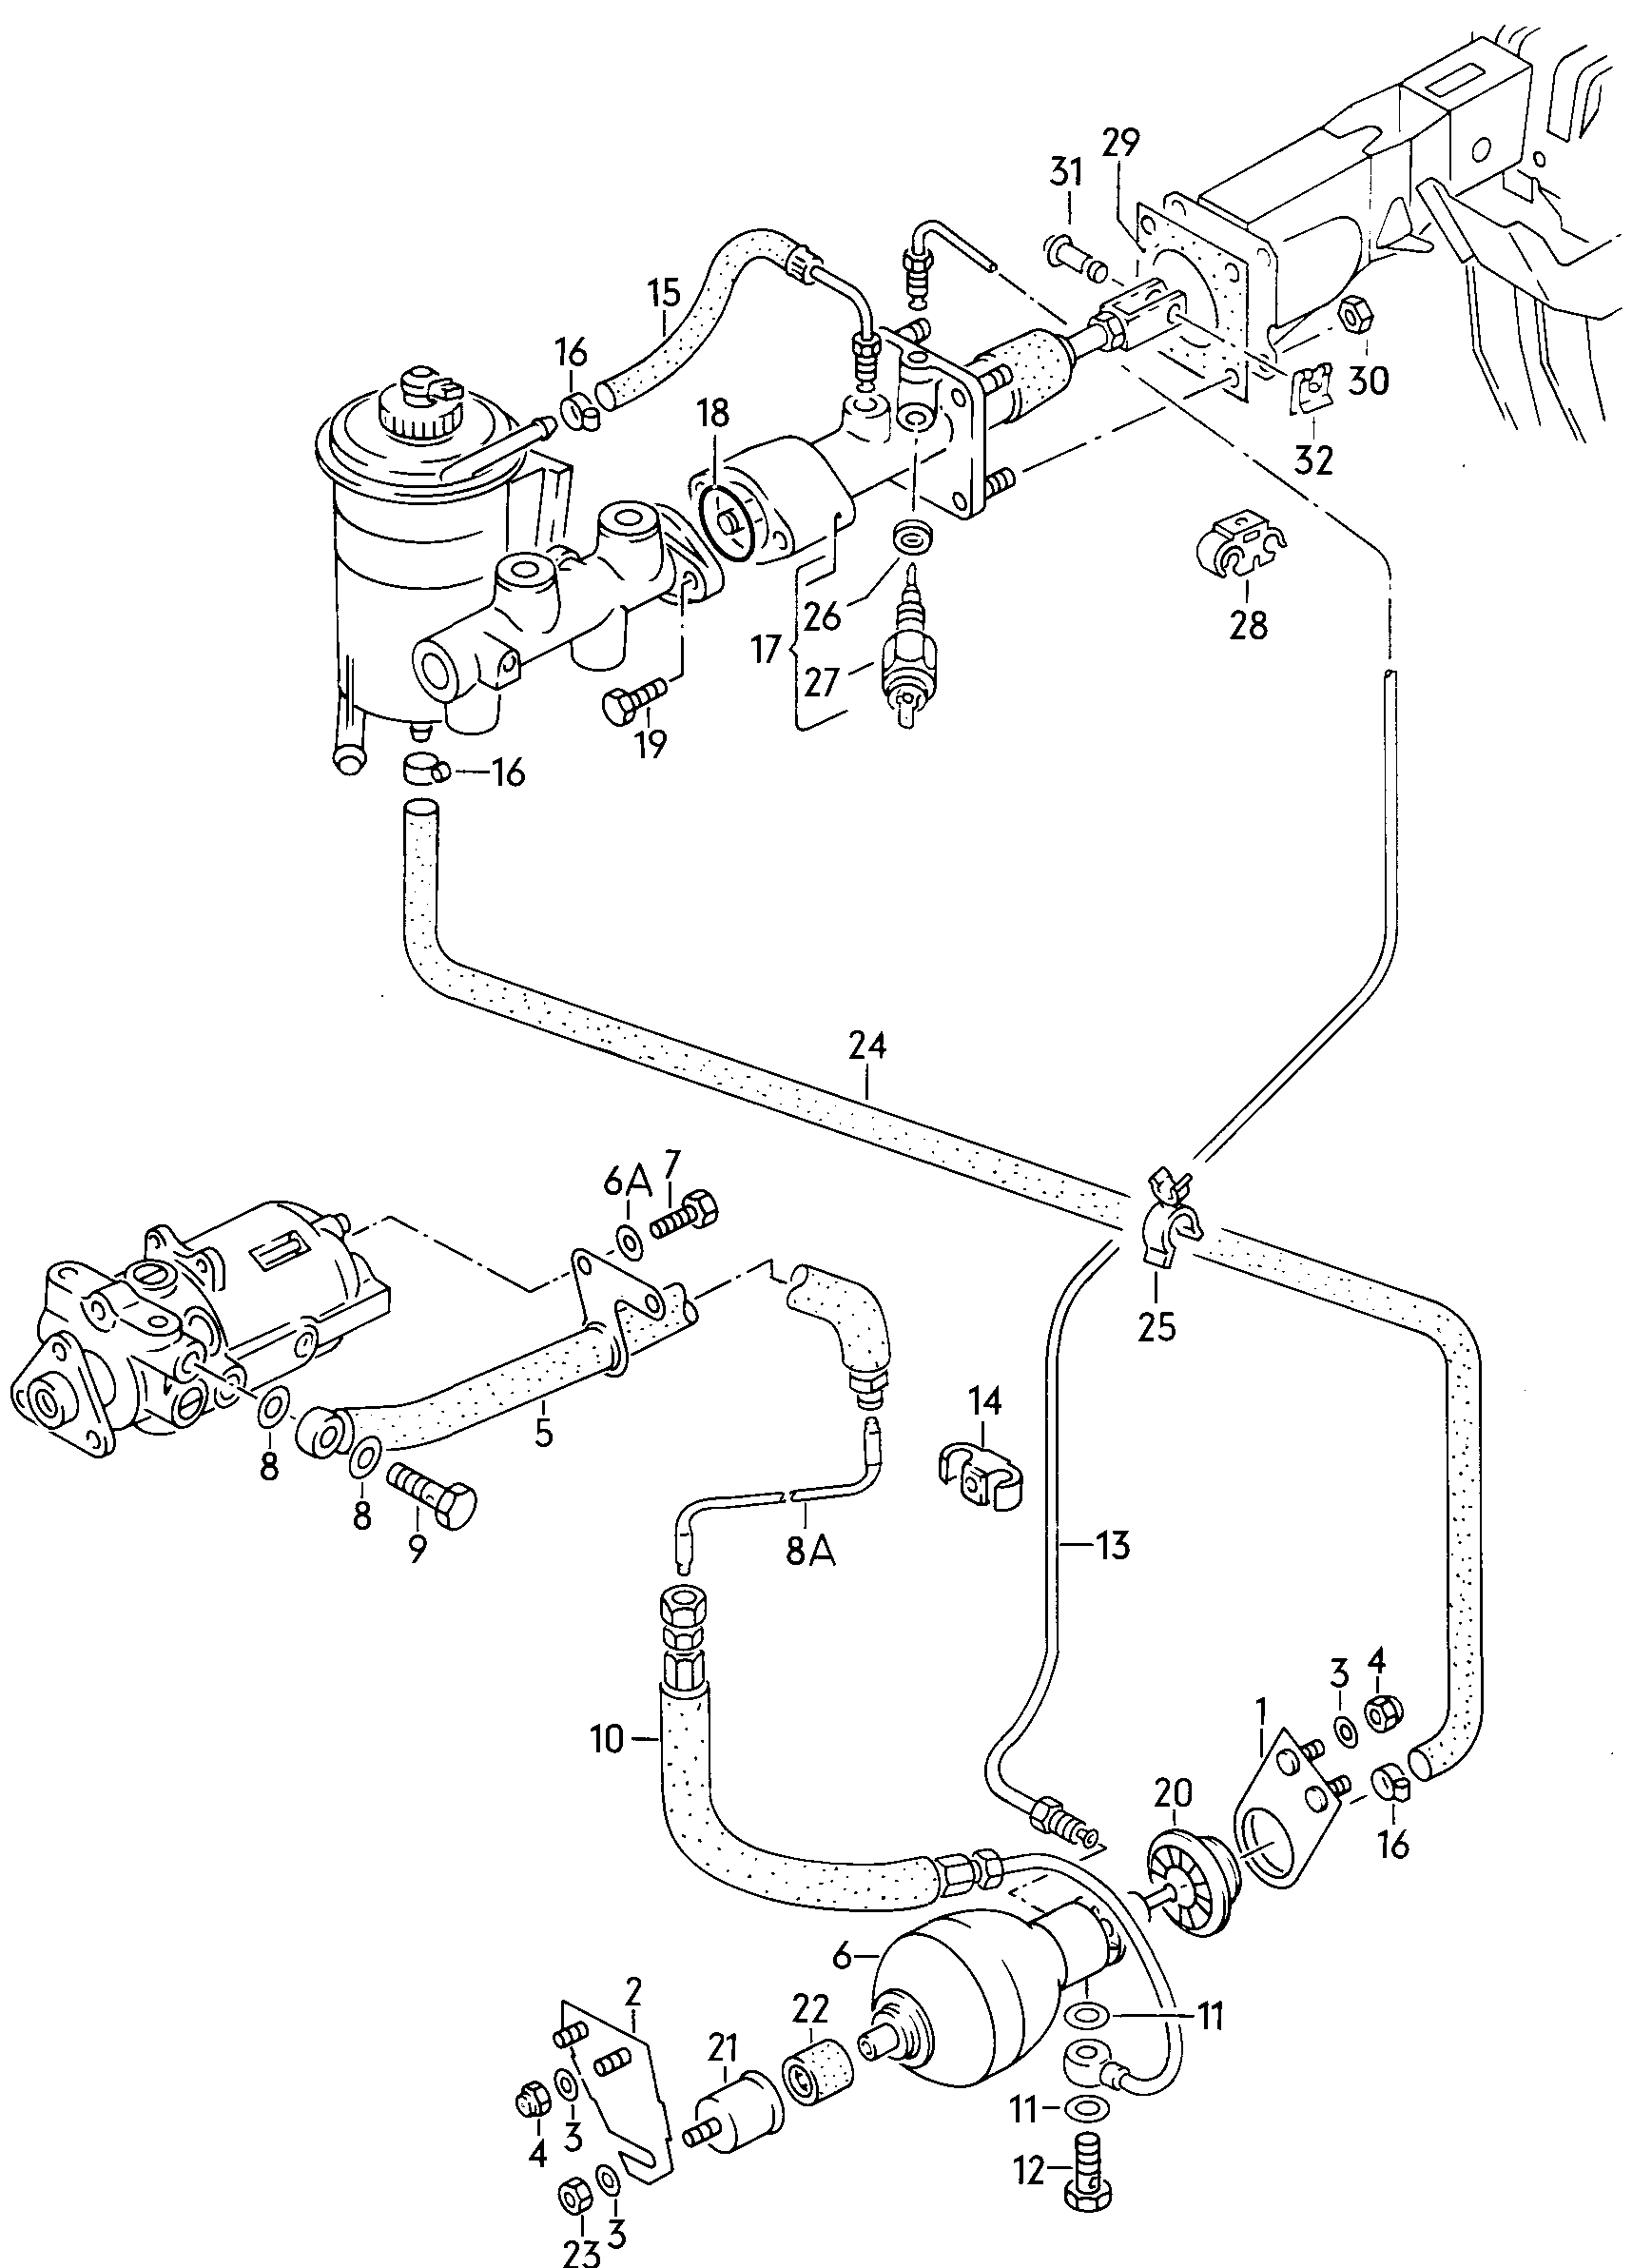 Pressure accumulatorvacuum hoses with<br>connecting partsfor models with hydraulic<br>pump front - Audi 100/Avant quattro - a10q